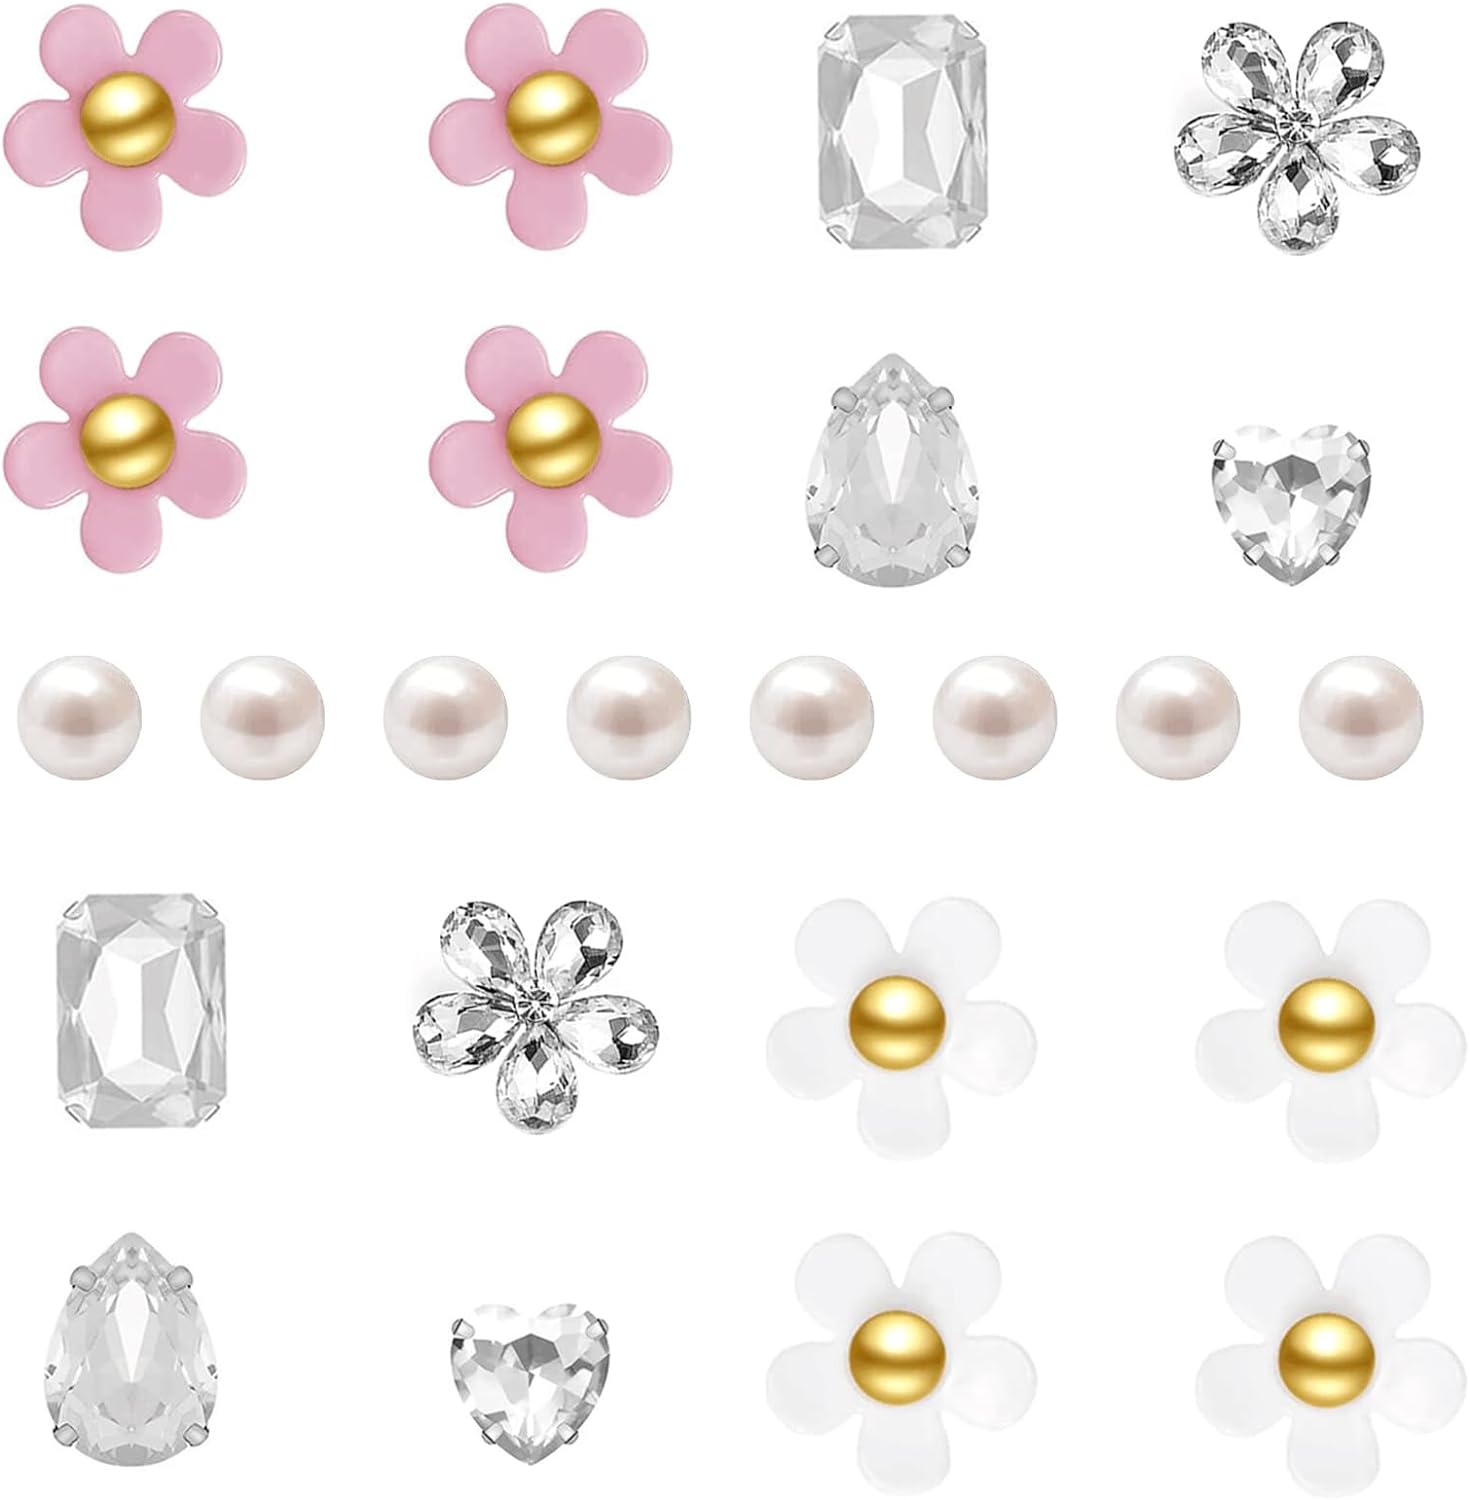 NEVEGE Flower Shoe Charms 19-25Pcs Shoe Charms Flower Crystal Rhinestone Pearl Flower Shoes Decoration Cute Shoe Charms for Girls Women